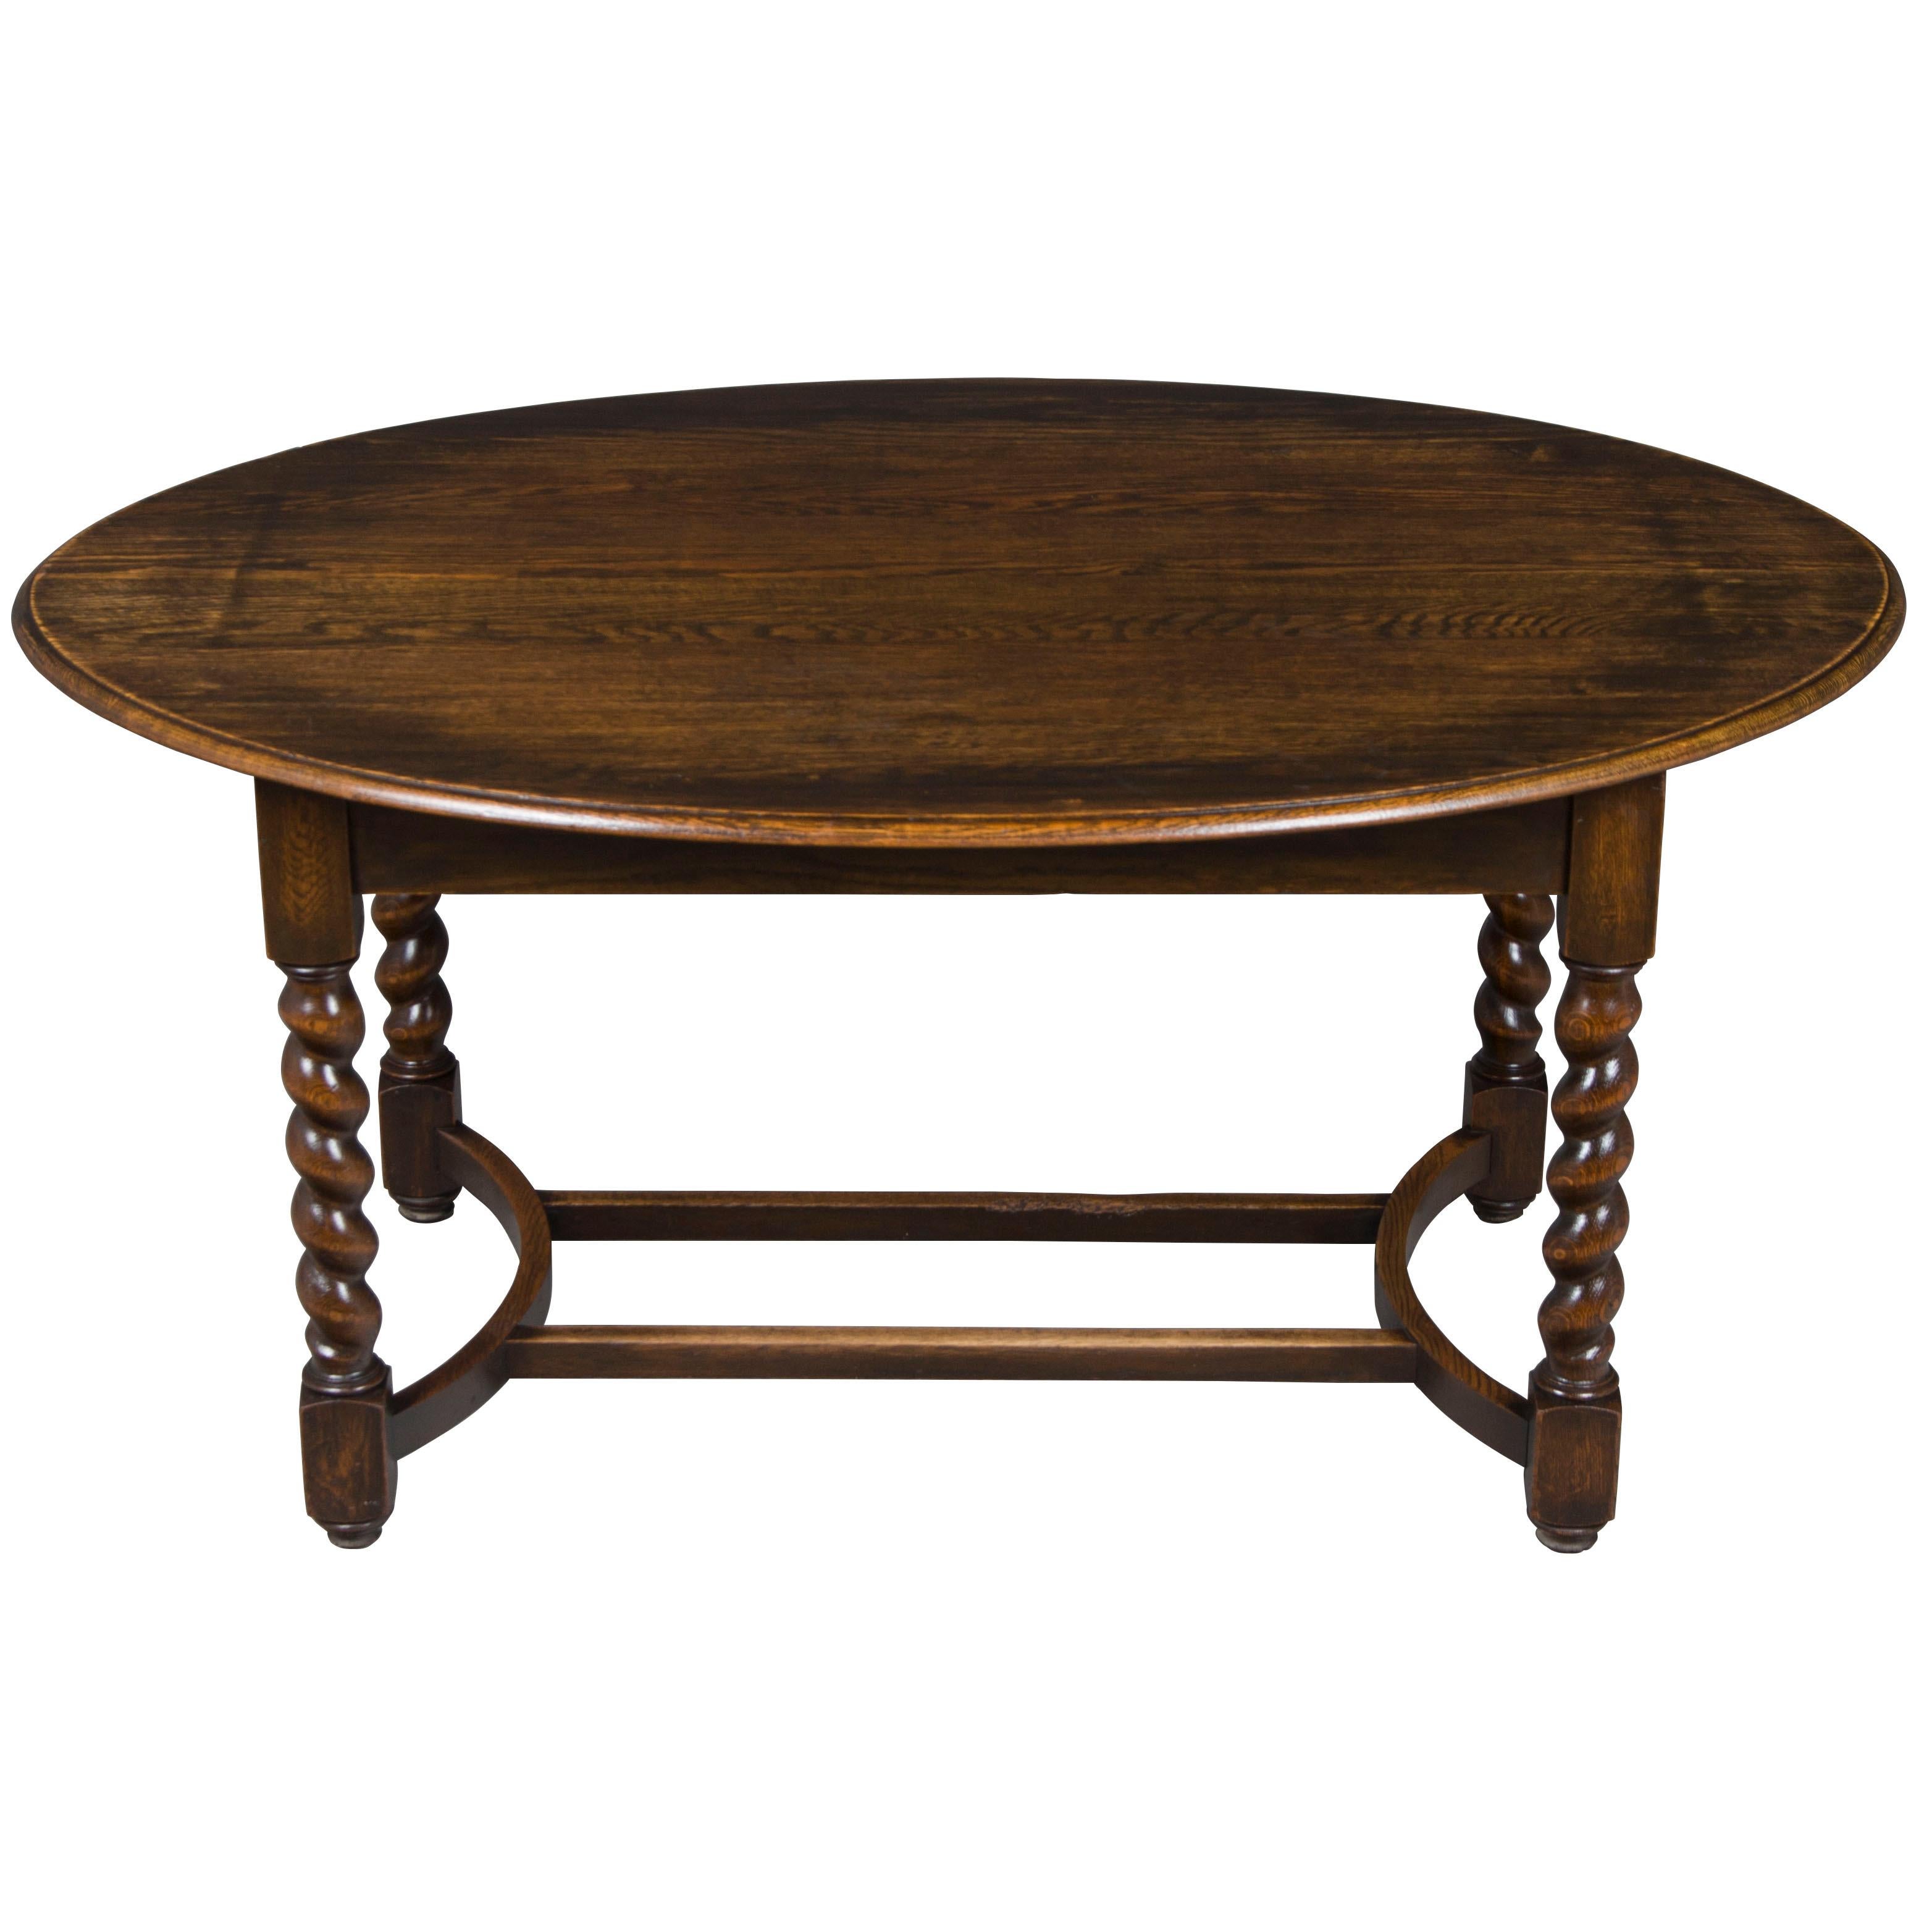 English Barley Twist Oak Oval Dining Table or Centre Table